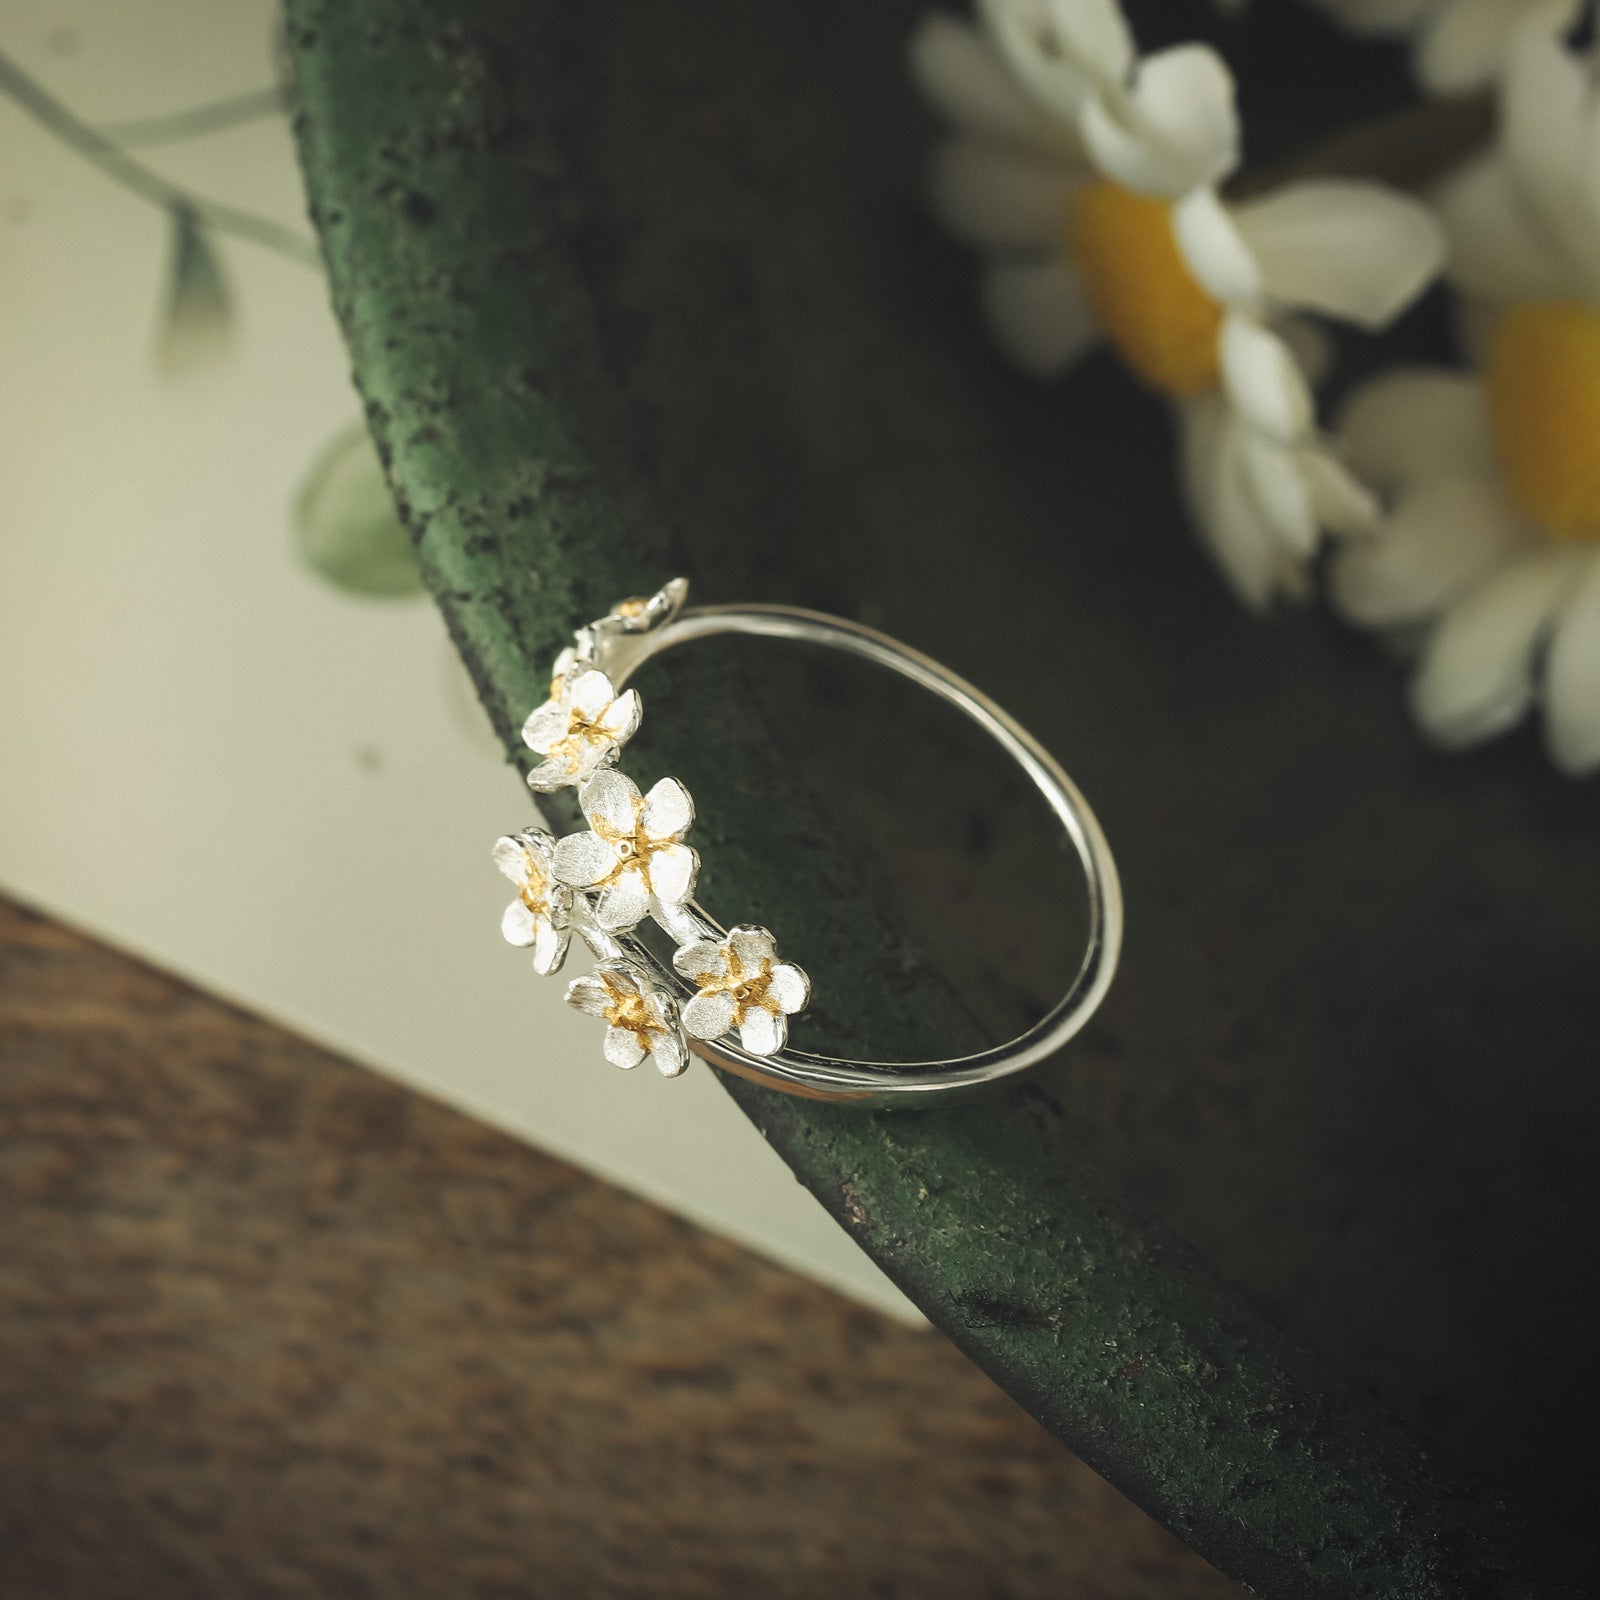 Forget-Me-Not Flowers Gold Ring